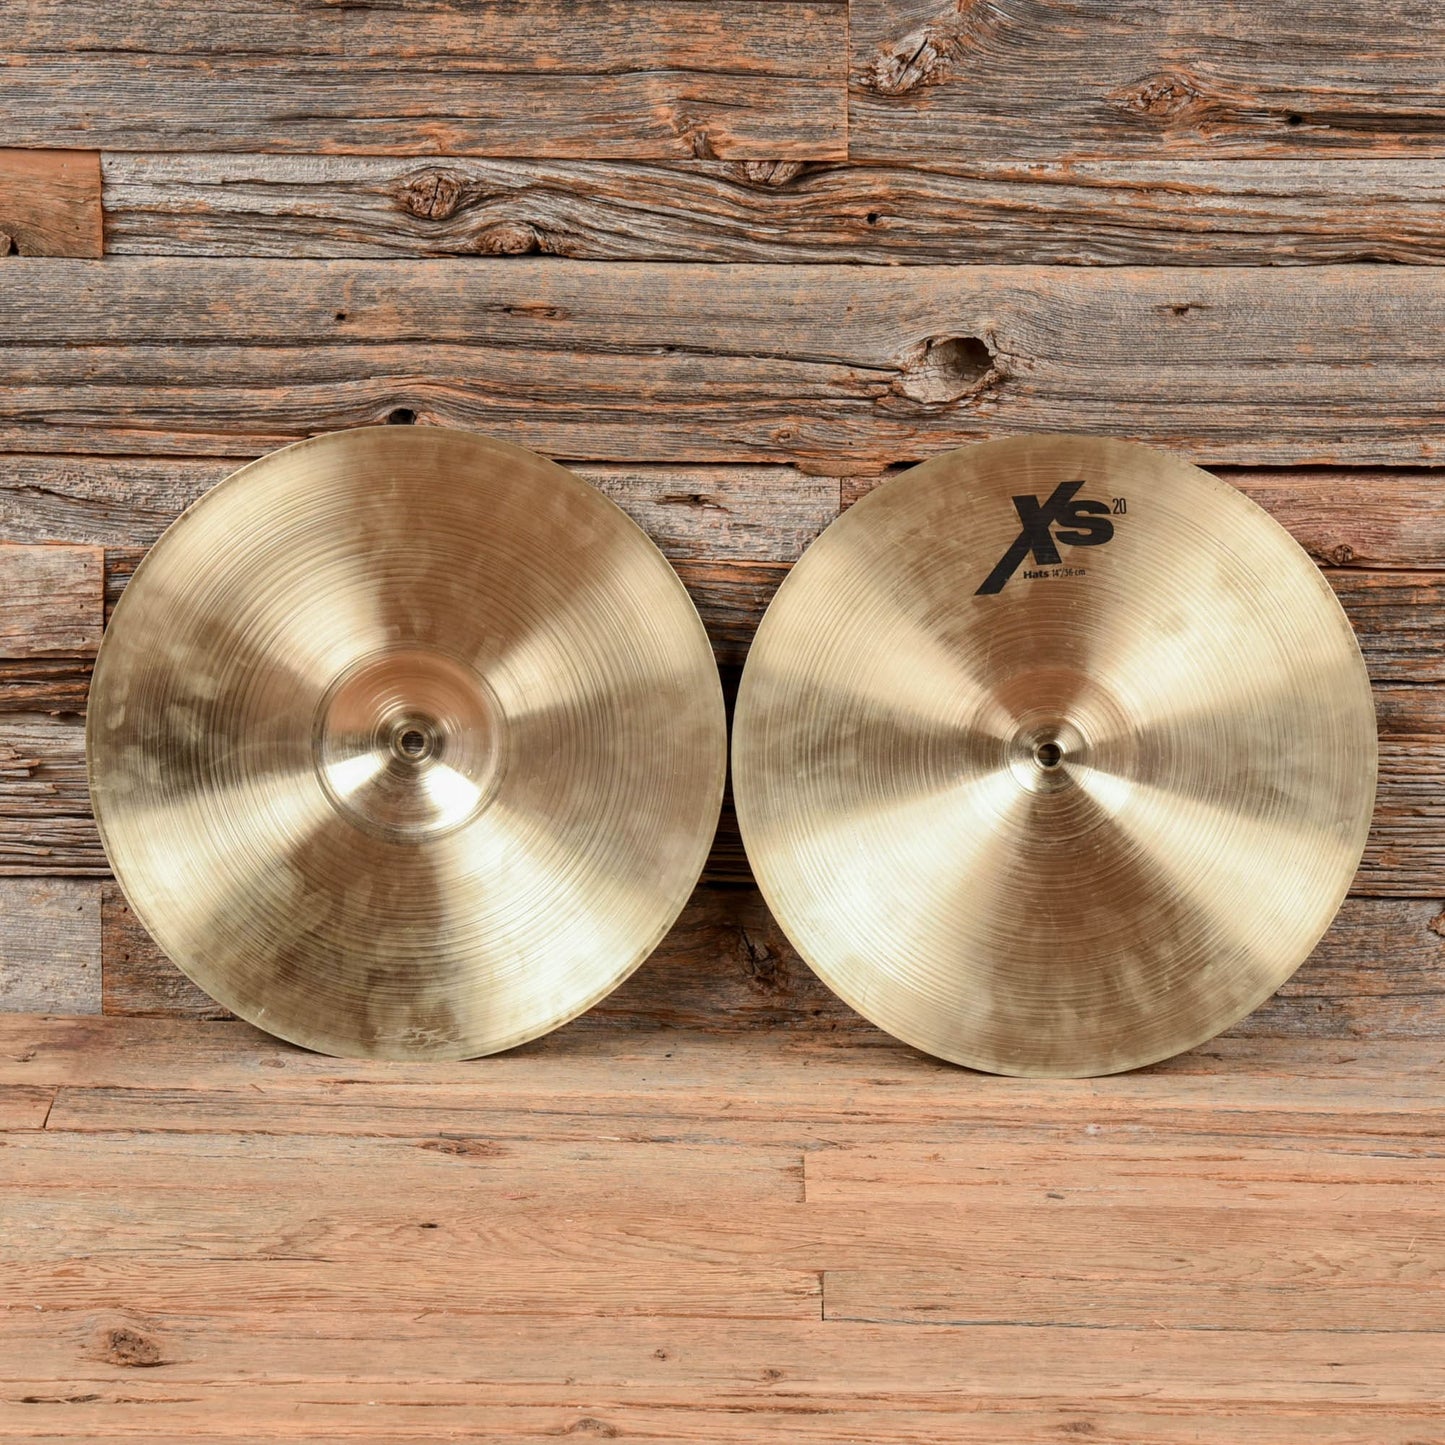 Sabian 14" XS20 Hi Hat Cymbals USED Drums and Percussion